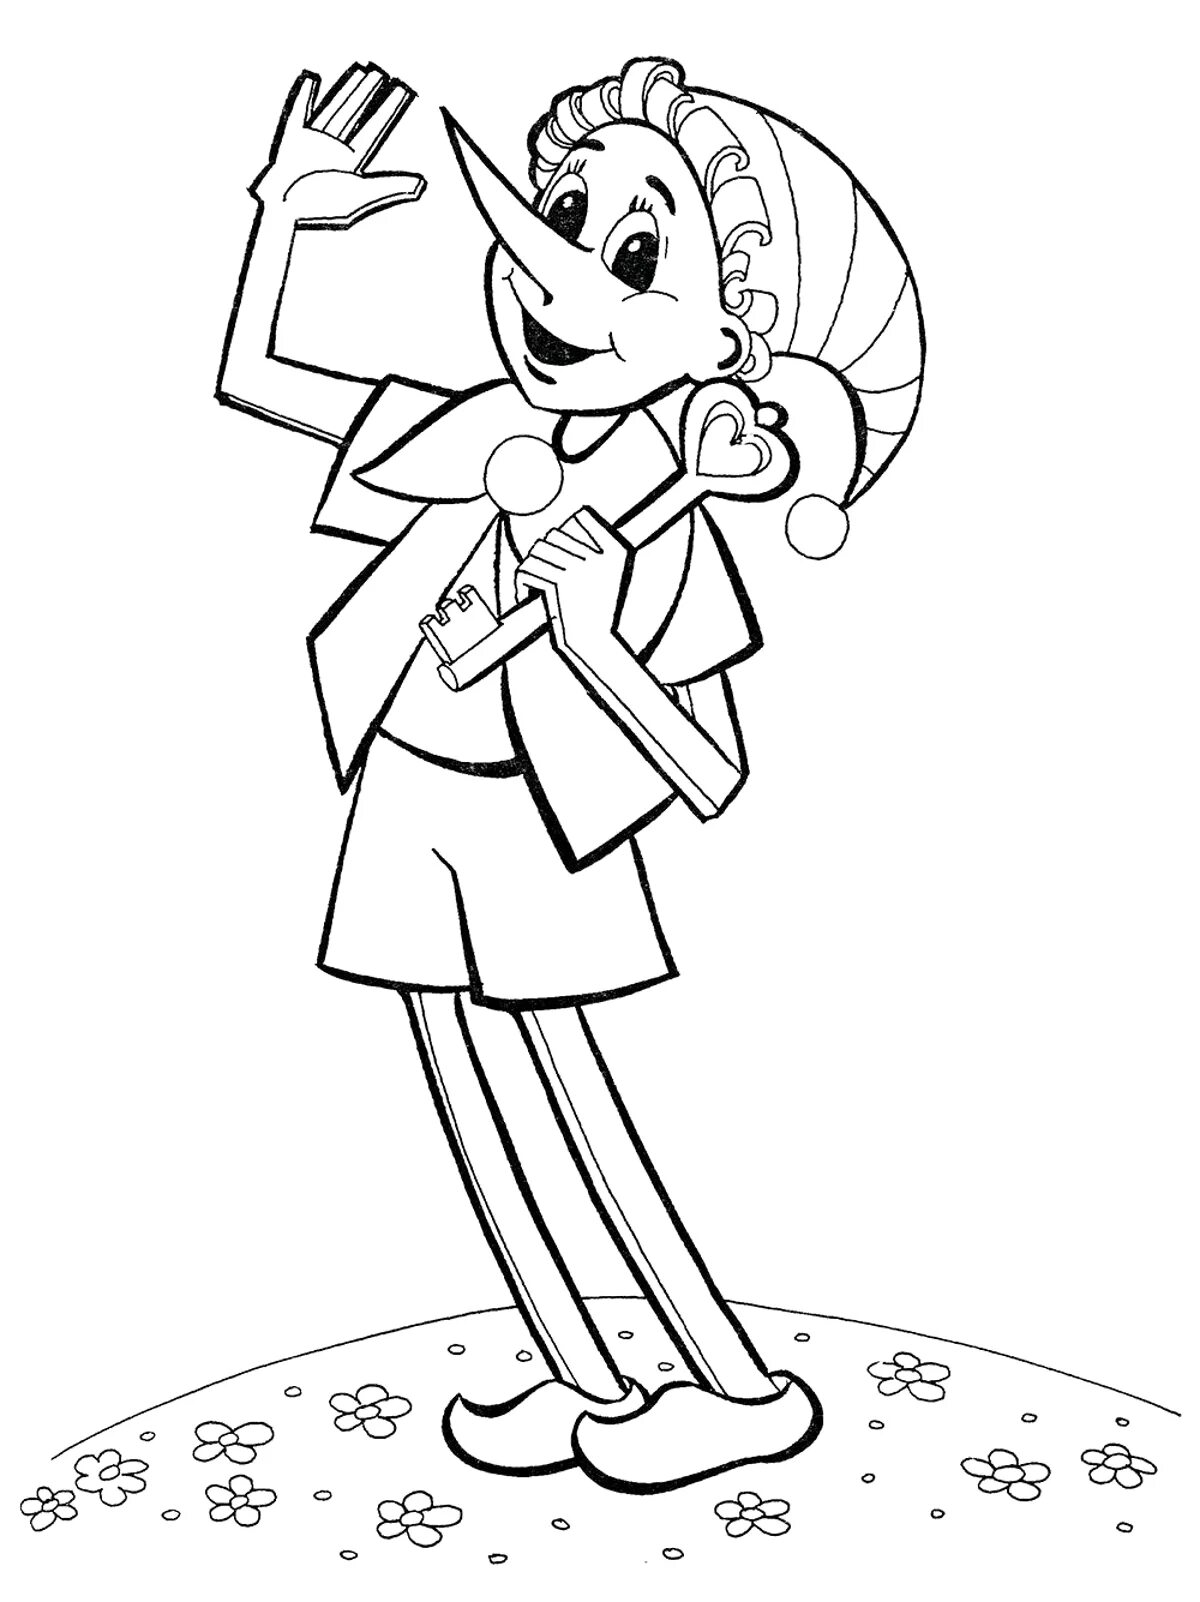 Flawless Pinocchio coloring page